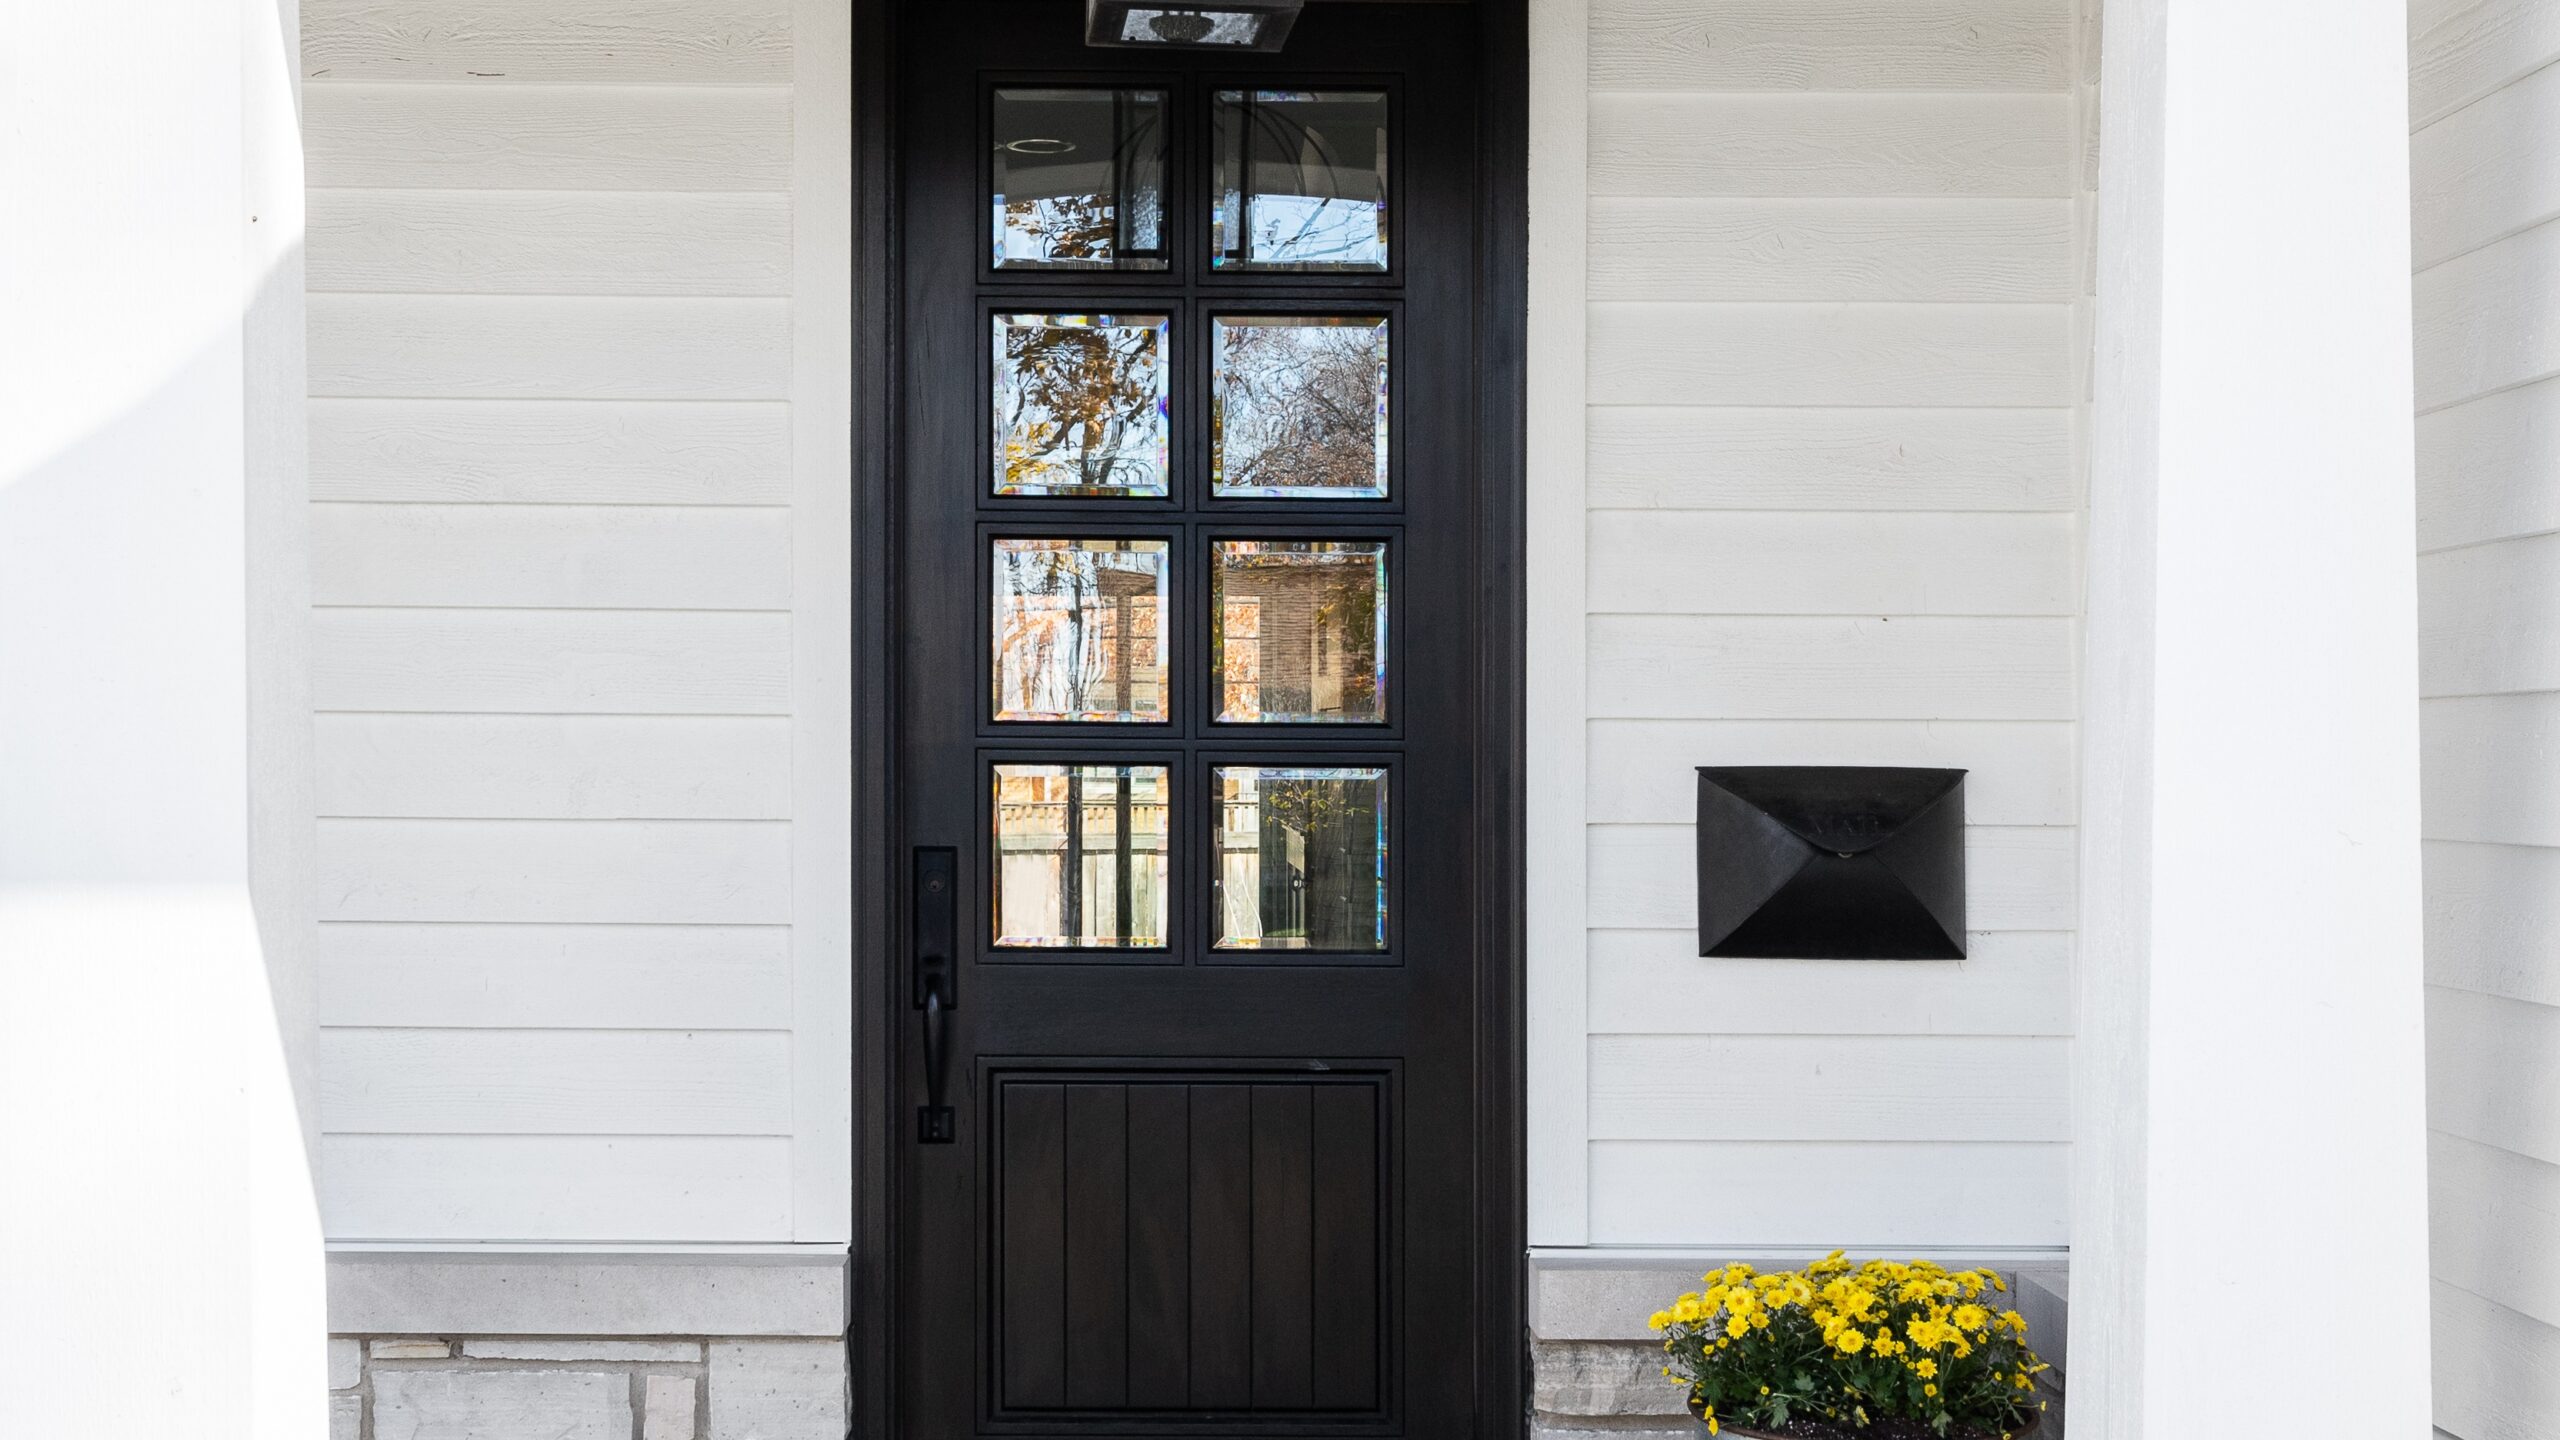 A black door in a home with white siding